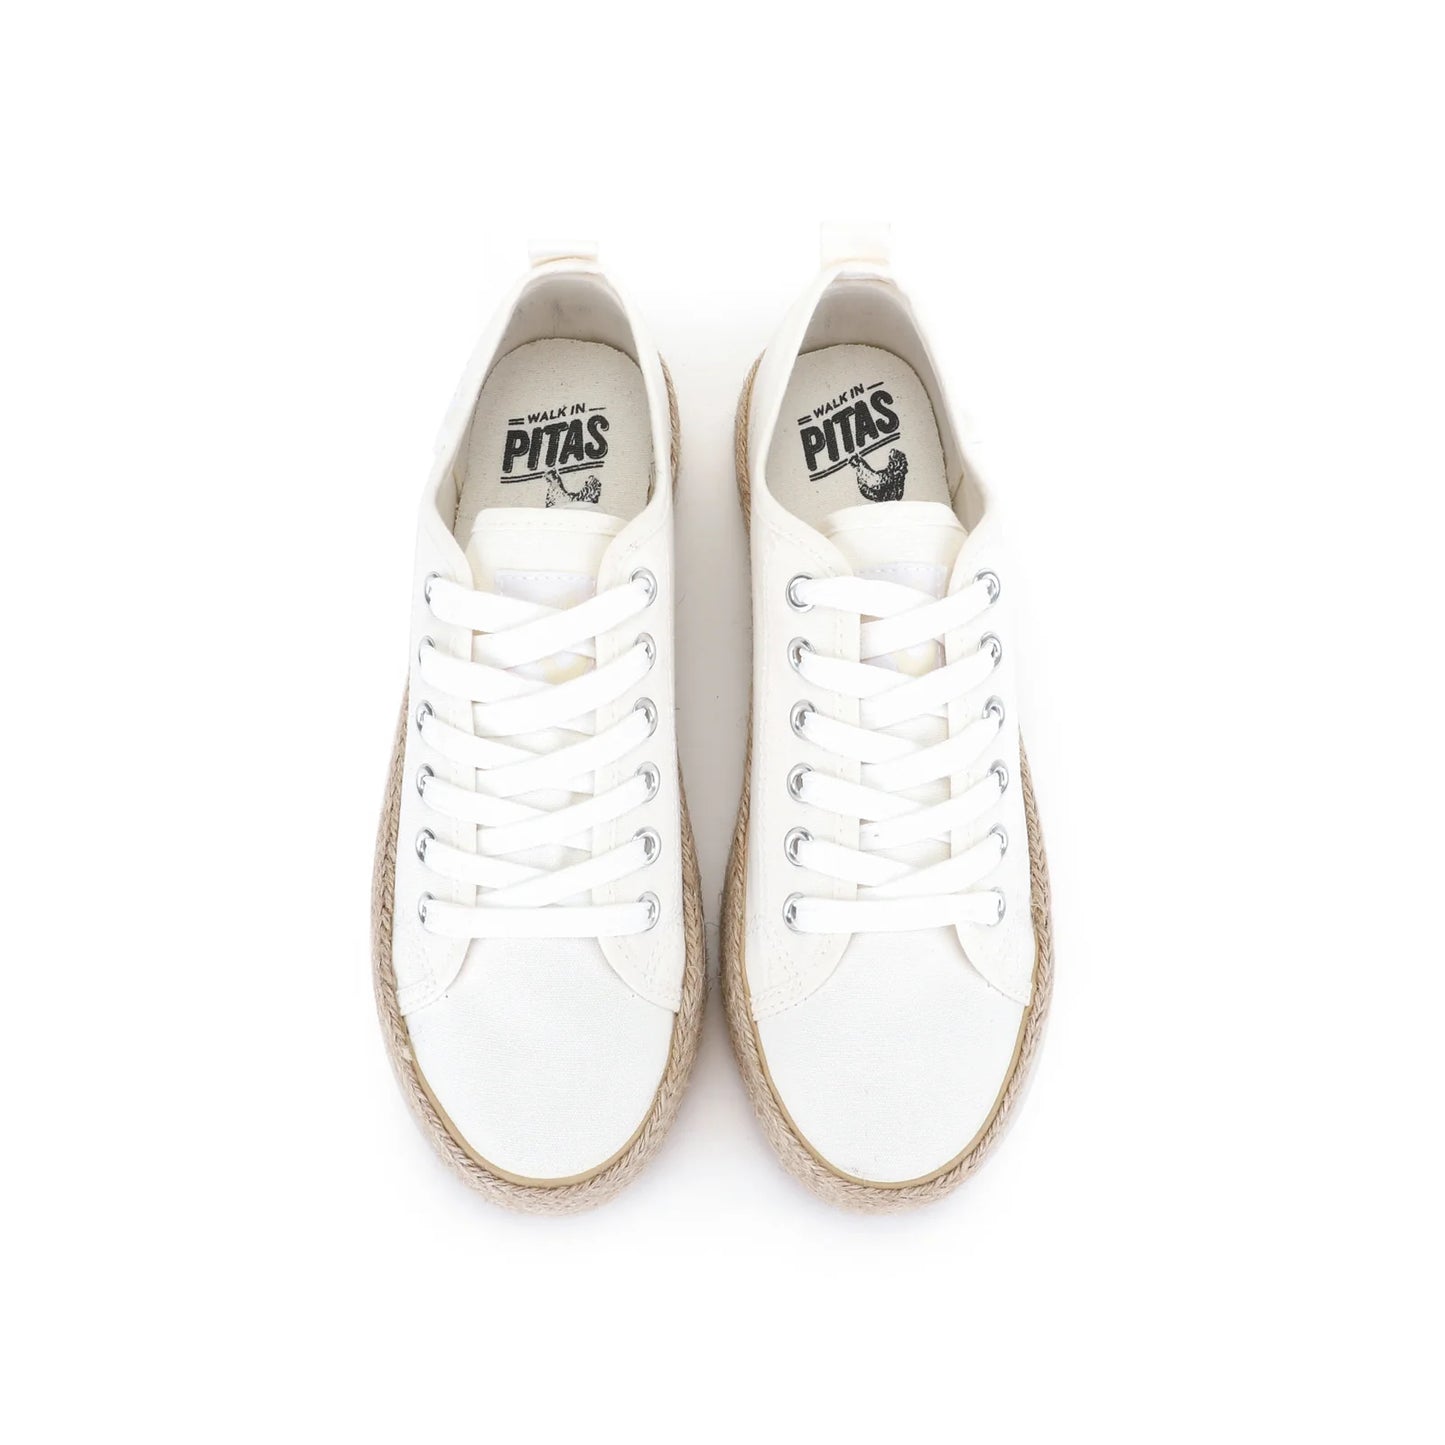 White Canvas Espadrille Sneakers